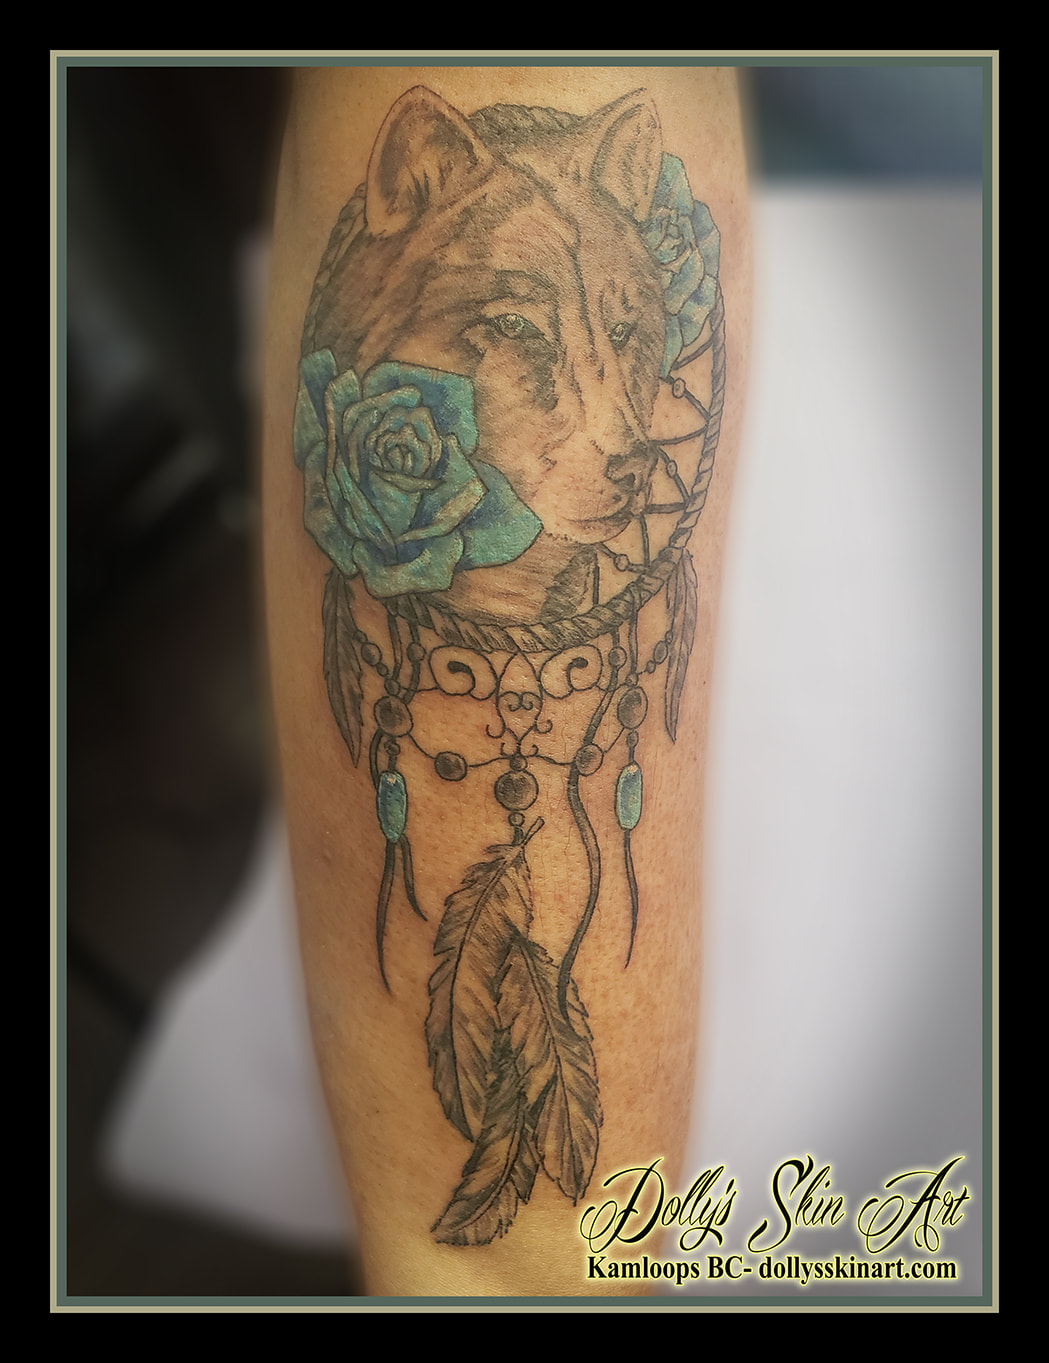 dream catcher tattoo flowers wolf colour blue black and grey shading beads tattoo dolly's skin art kamloops